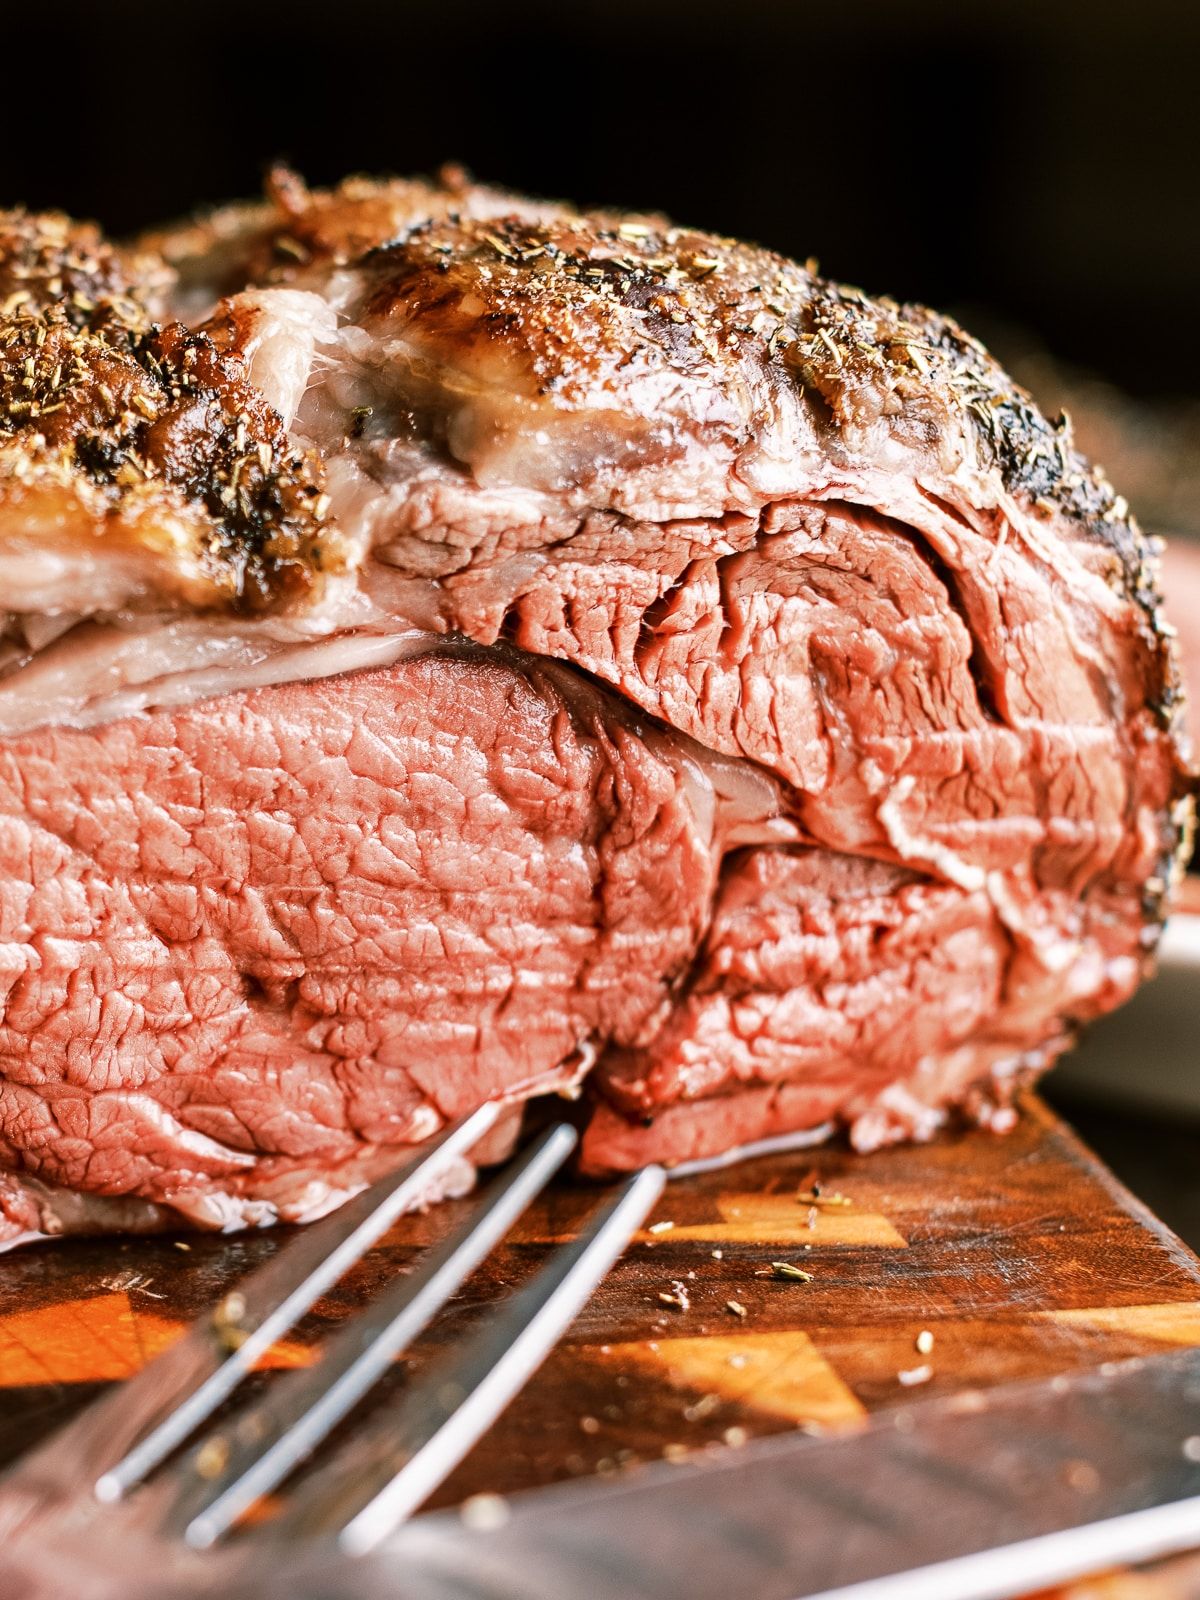 Slice Perfection: The Best Carving Knife for Prime Rib Roasts